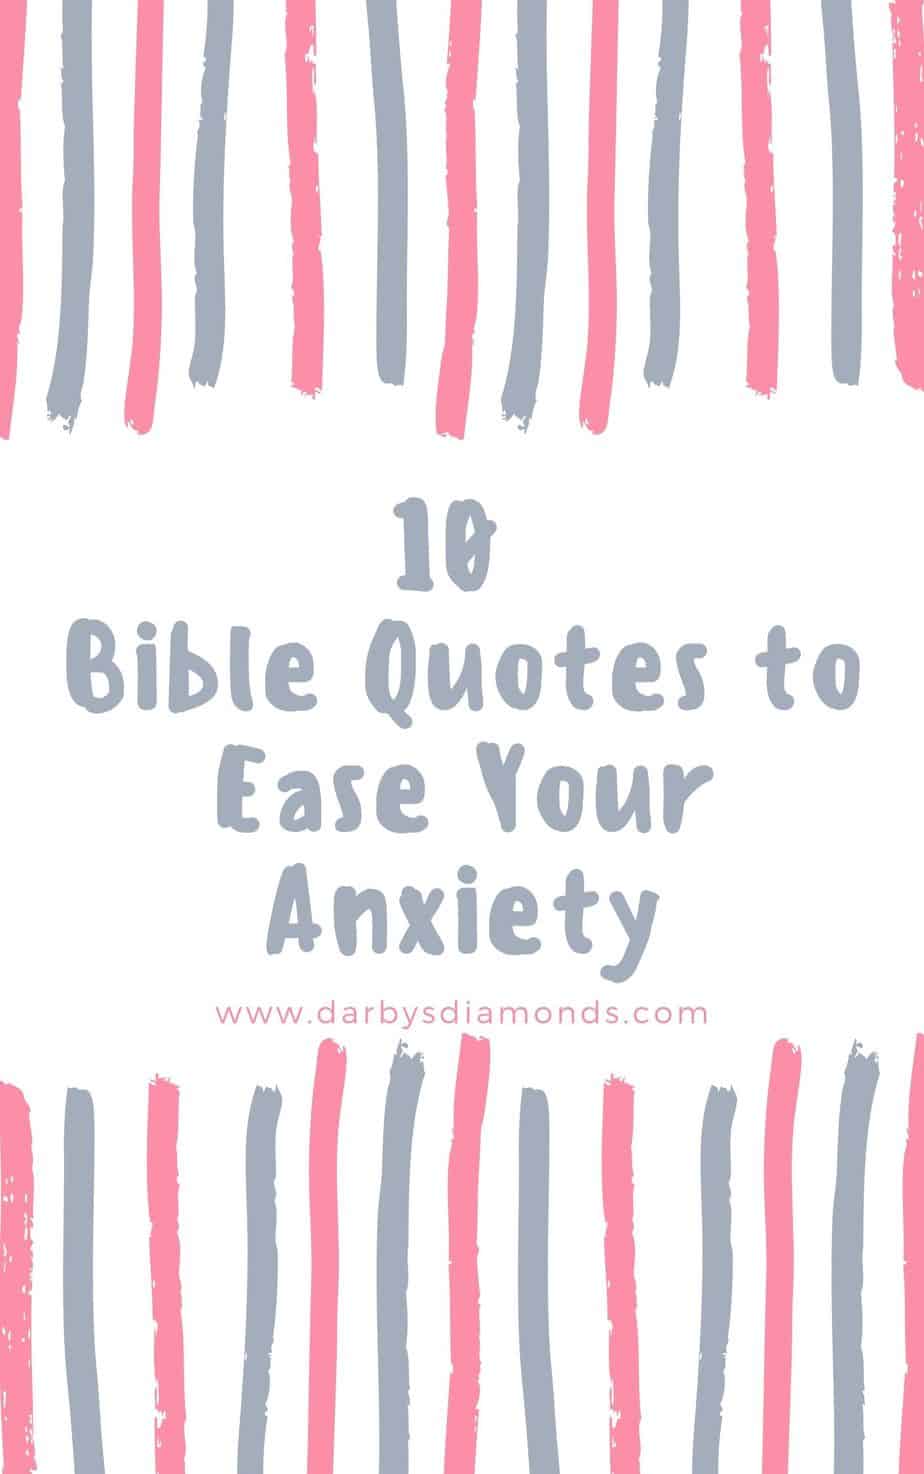 10 Bible Quotes To Ease Your Anxiety